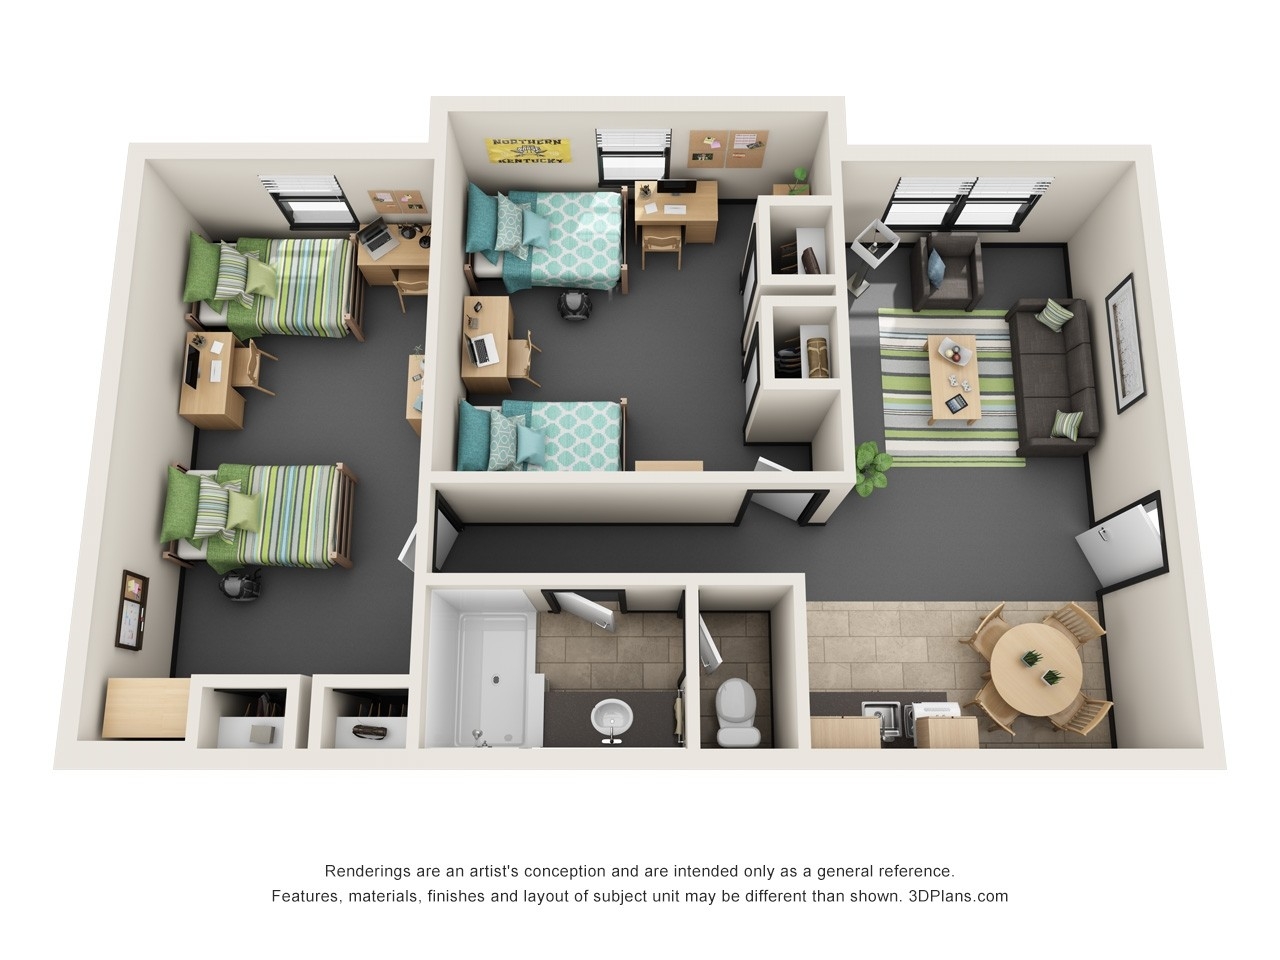 Rendering of Norse Hall 2-Bedroom Apartment. This rendering is an artist's conception and are intended only as a general reference. Features, materials, finishes and layout of subject unit may be different than shown. 